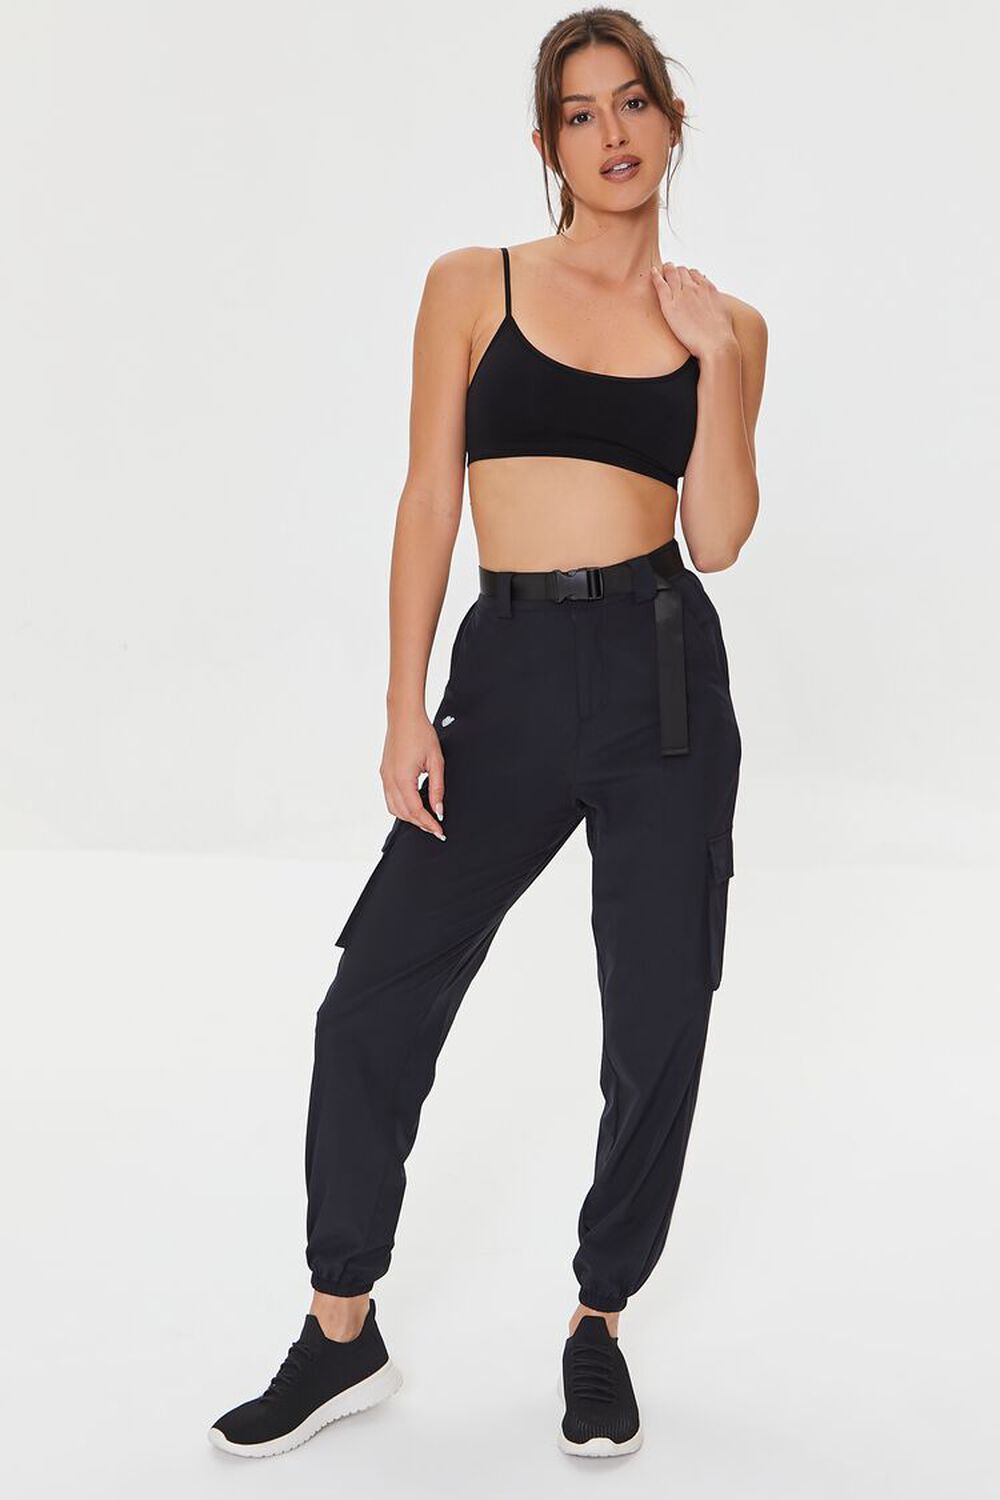 BLACK Active Release-Buckle Belted Joggers, image 1